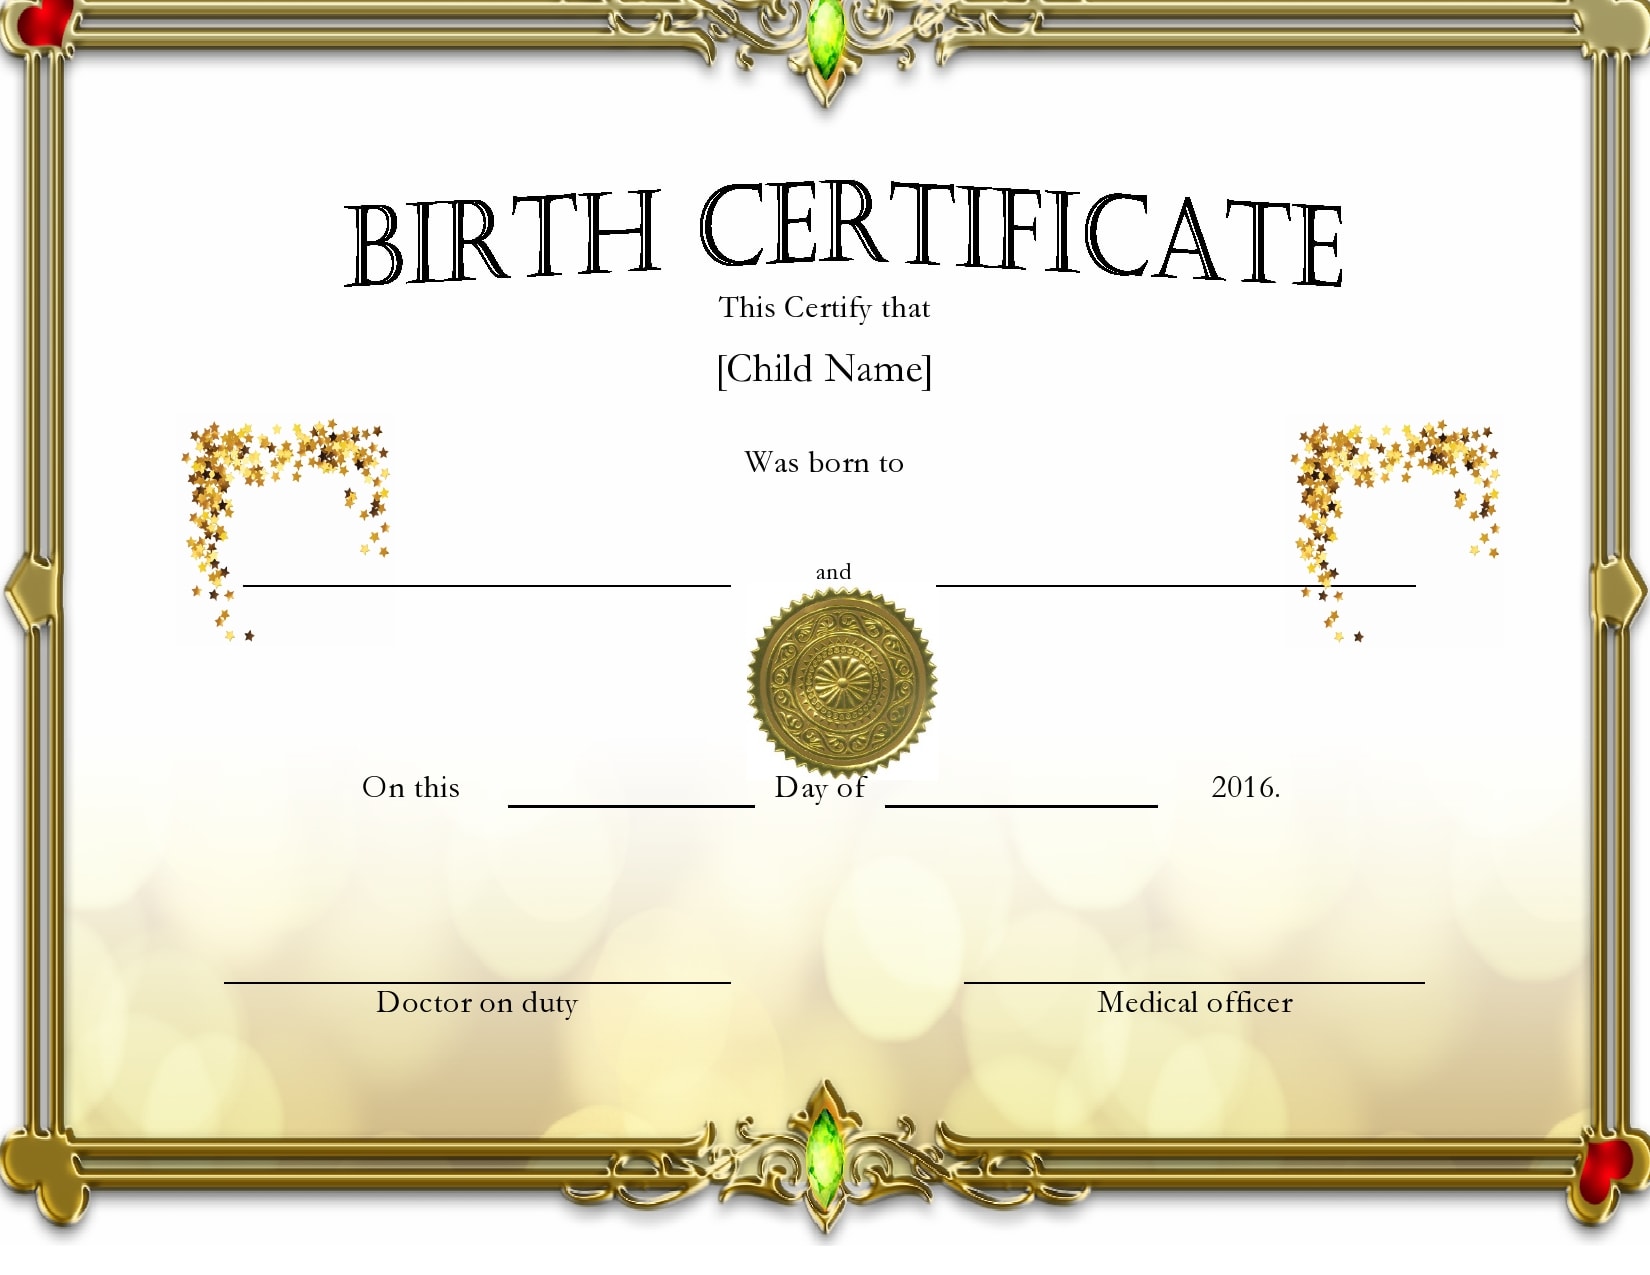 22 Blank Birth Certificate Templates (& Examples) - PrintableTemplates For Novelty Birth Certificate Template